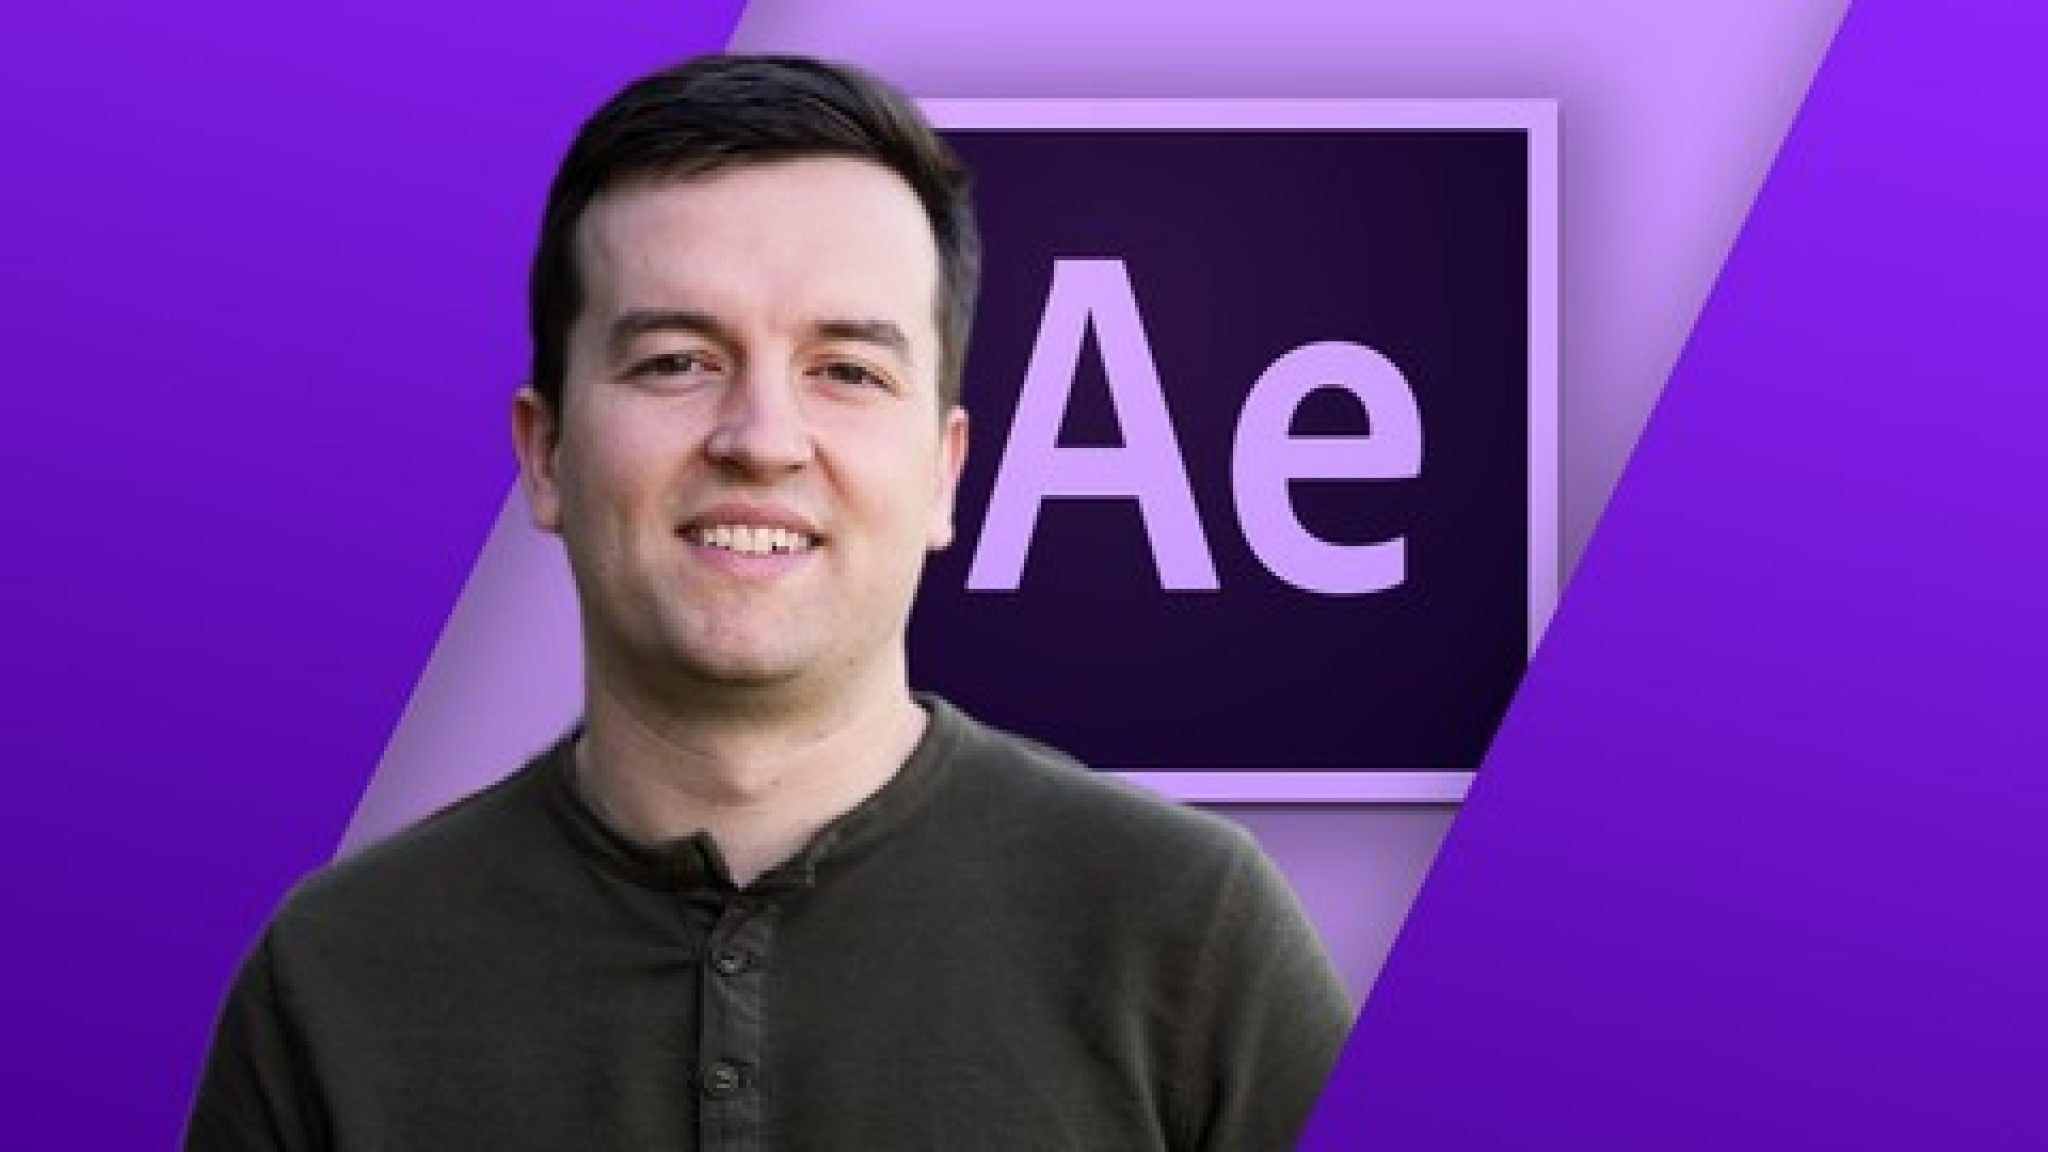 after effects cc masterclass includes cc 2019 updates download